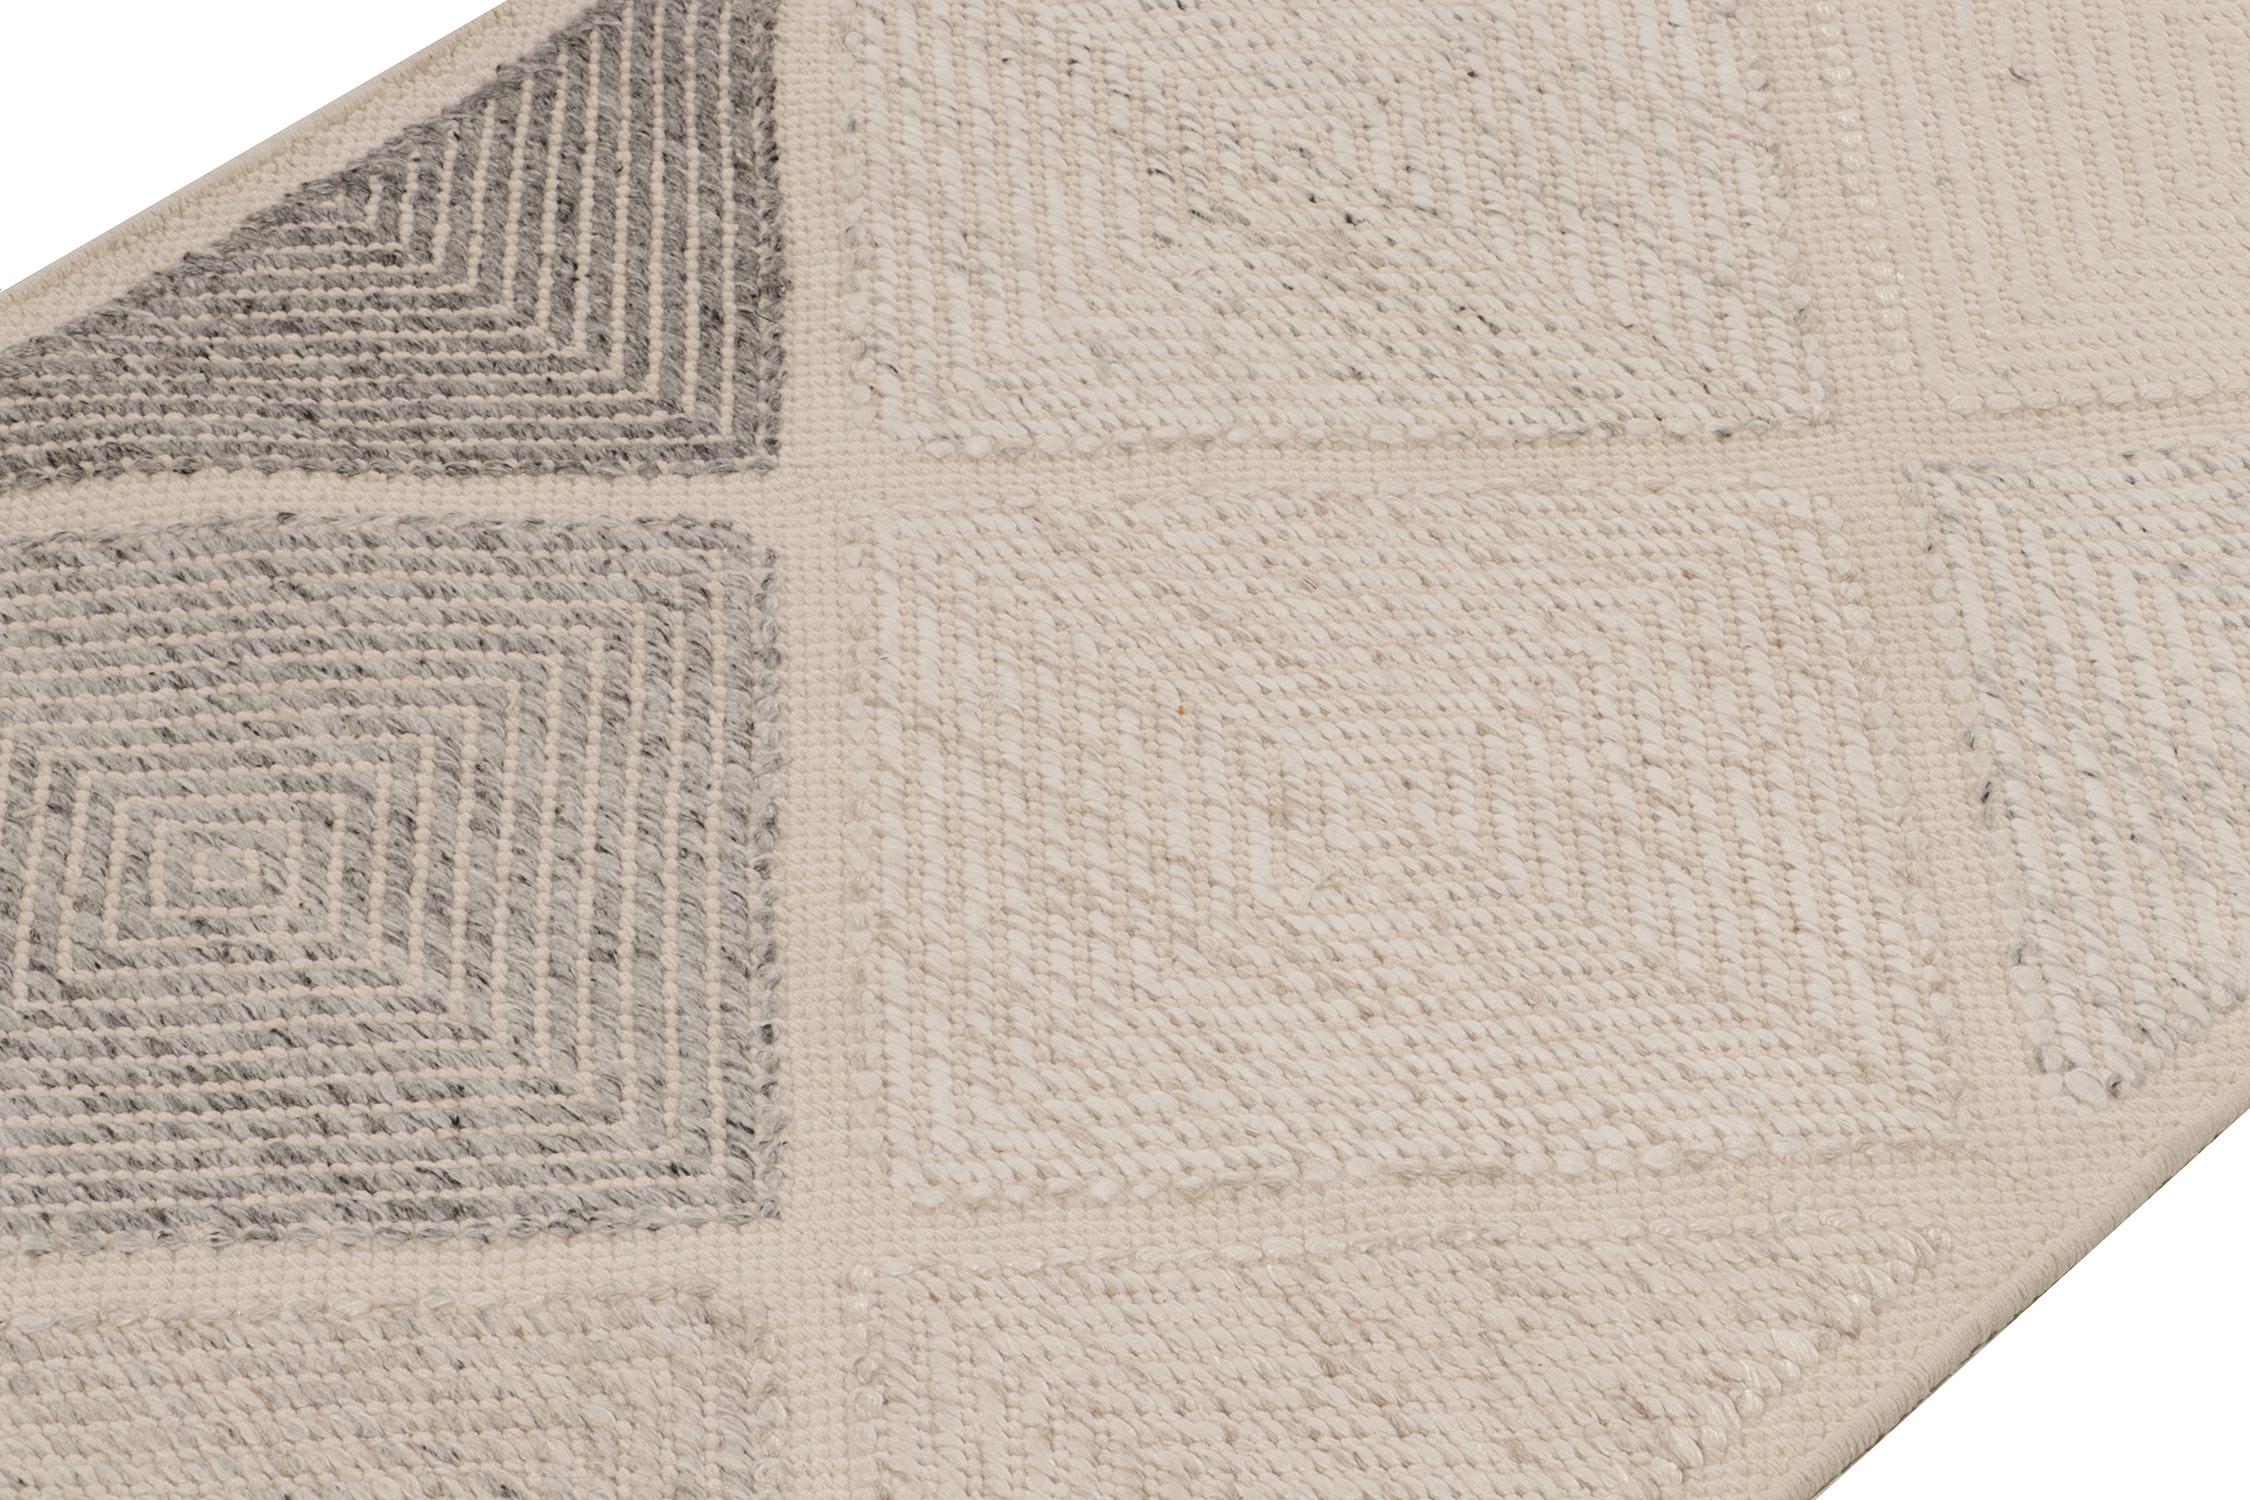 Rug & Kilim's Scandinavian Kilim Style Rug in White, Gray Diamond Pattern In New Condition For Sale In Long Island City, NY